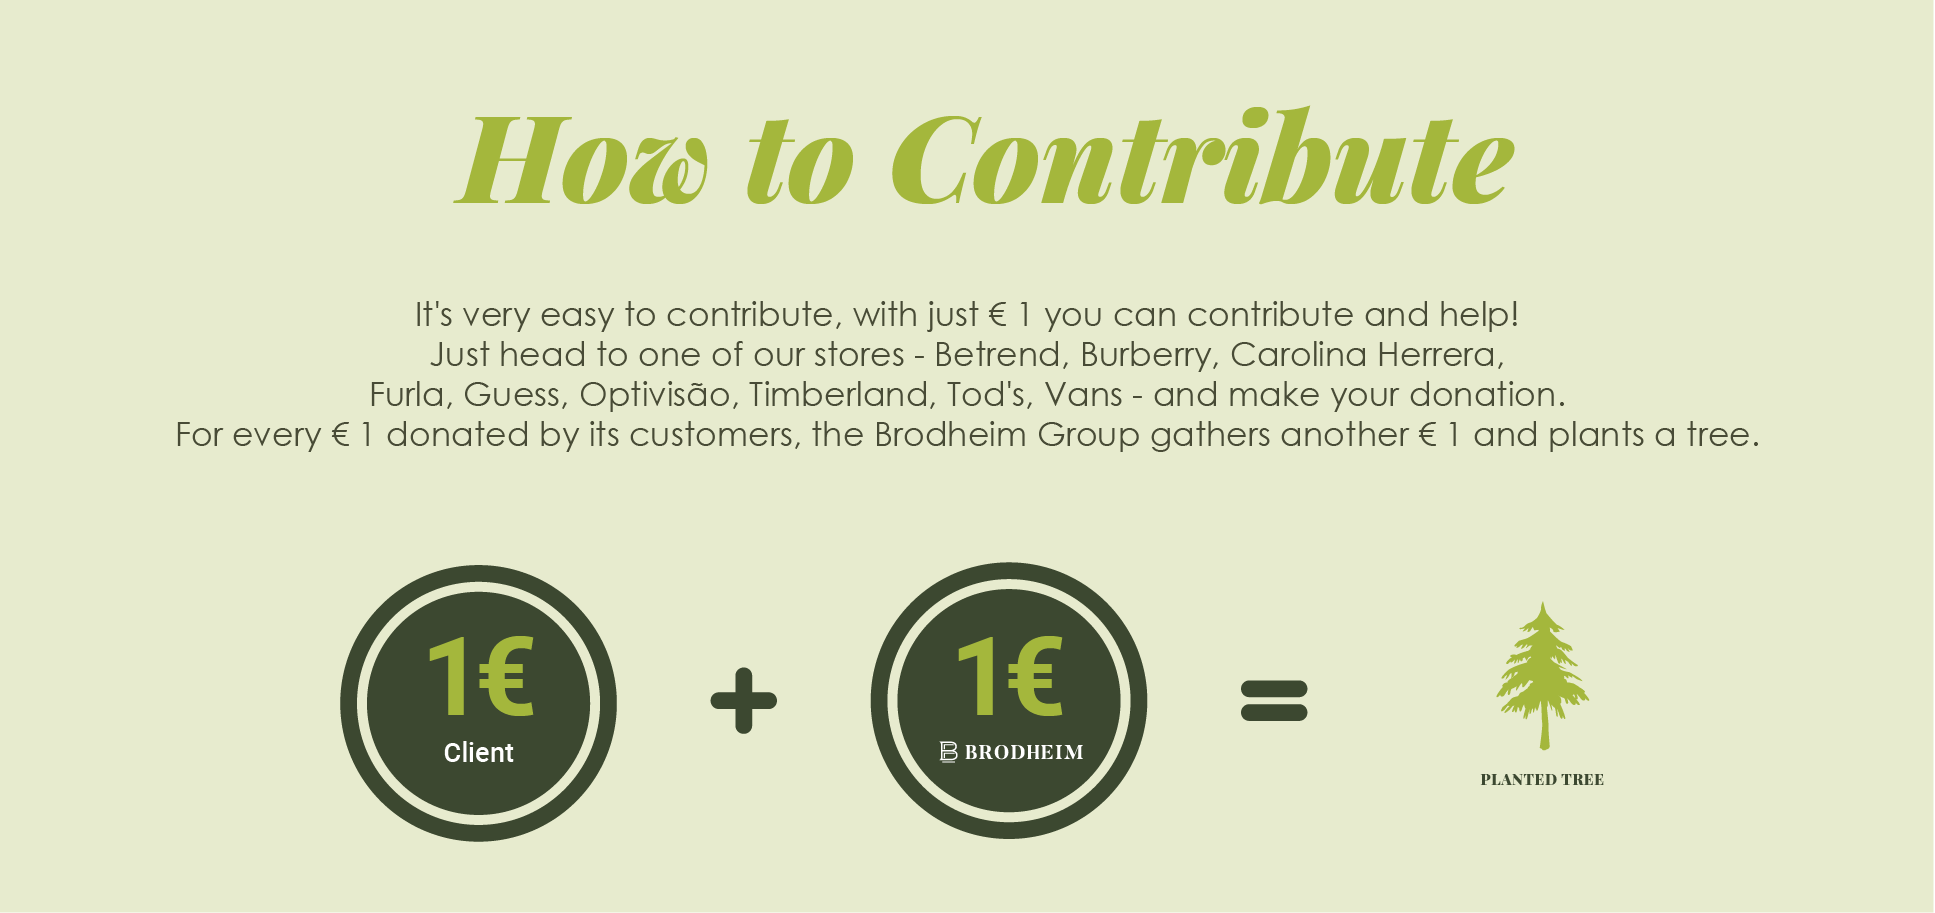  HOW TO CONTRIBUTE